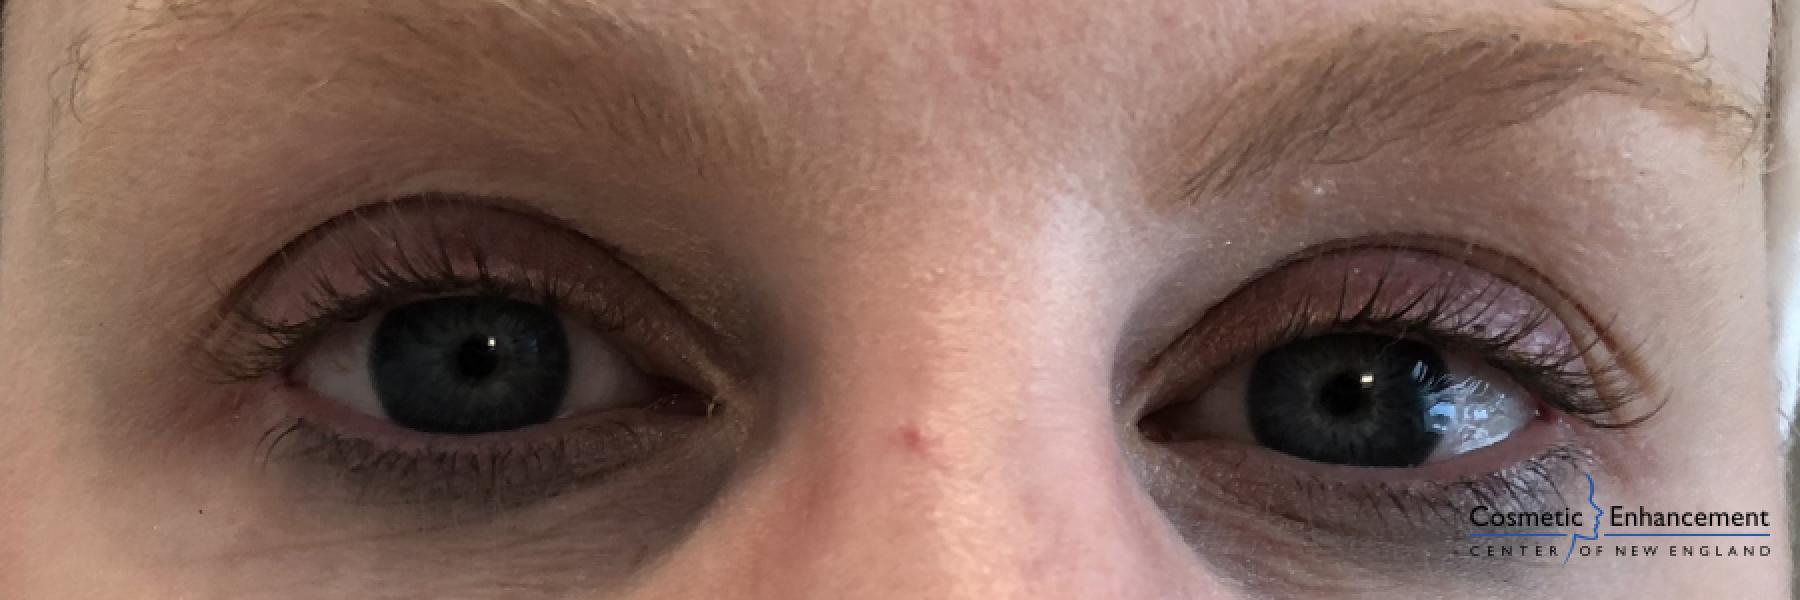 Lash Lift And Tint: Patient 2 - Before 1